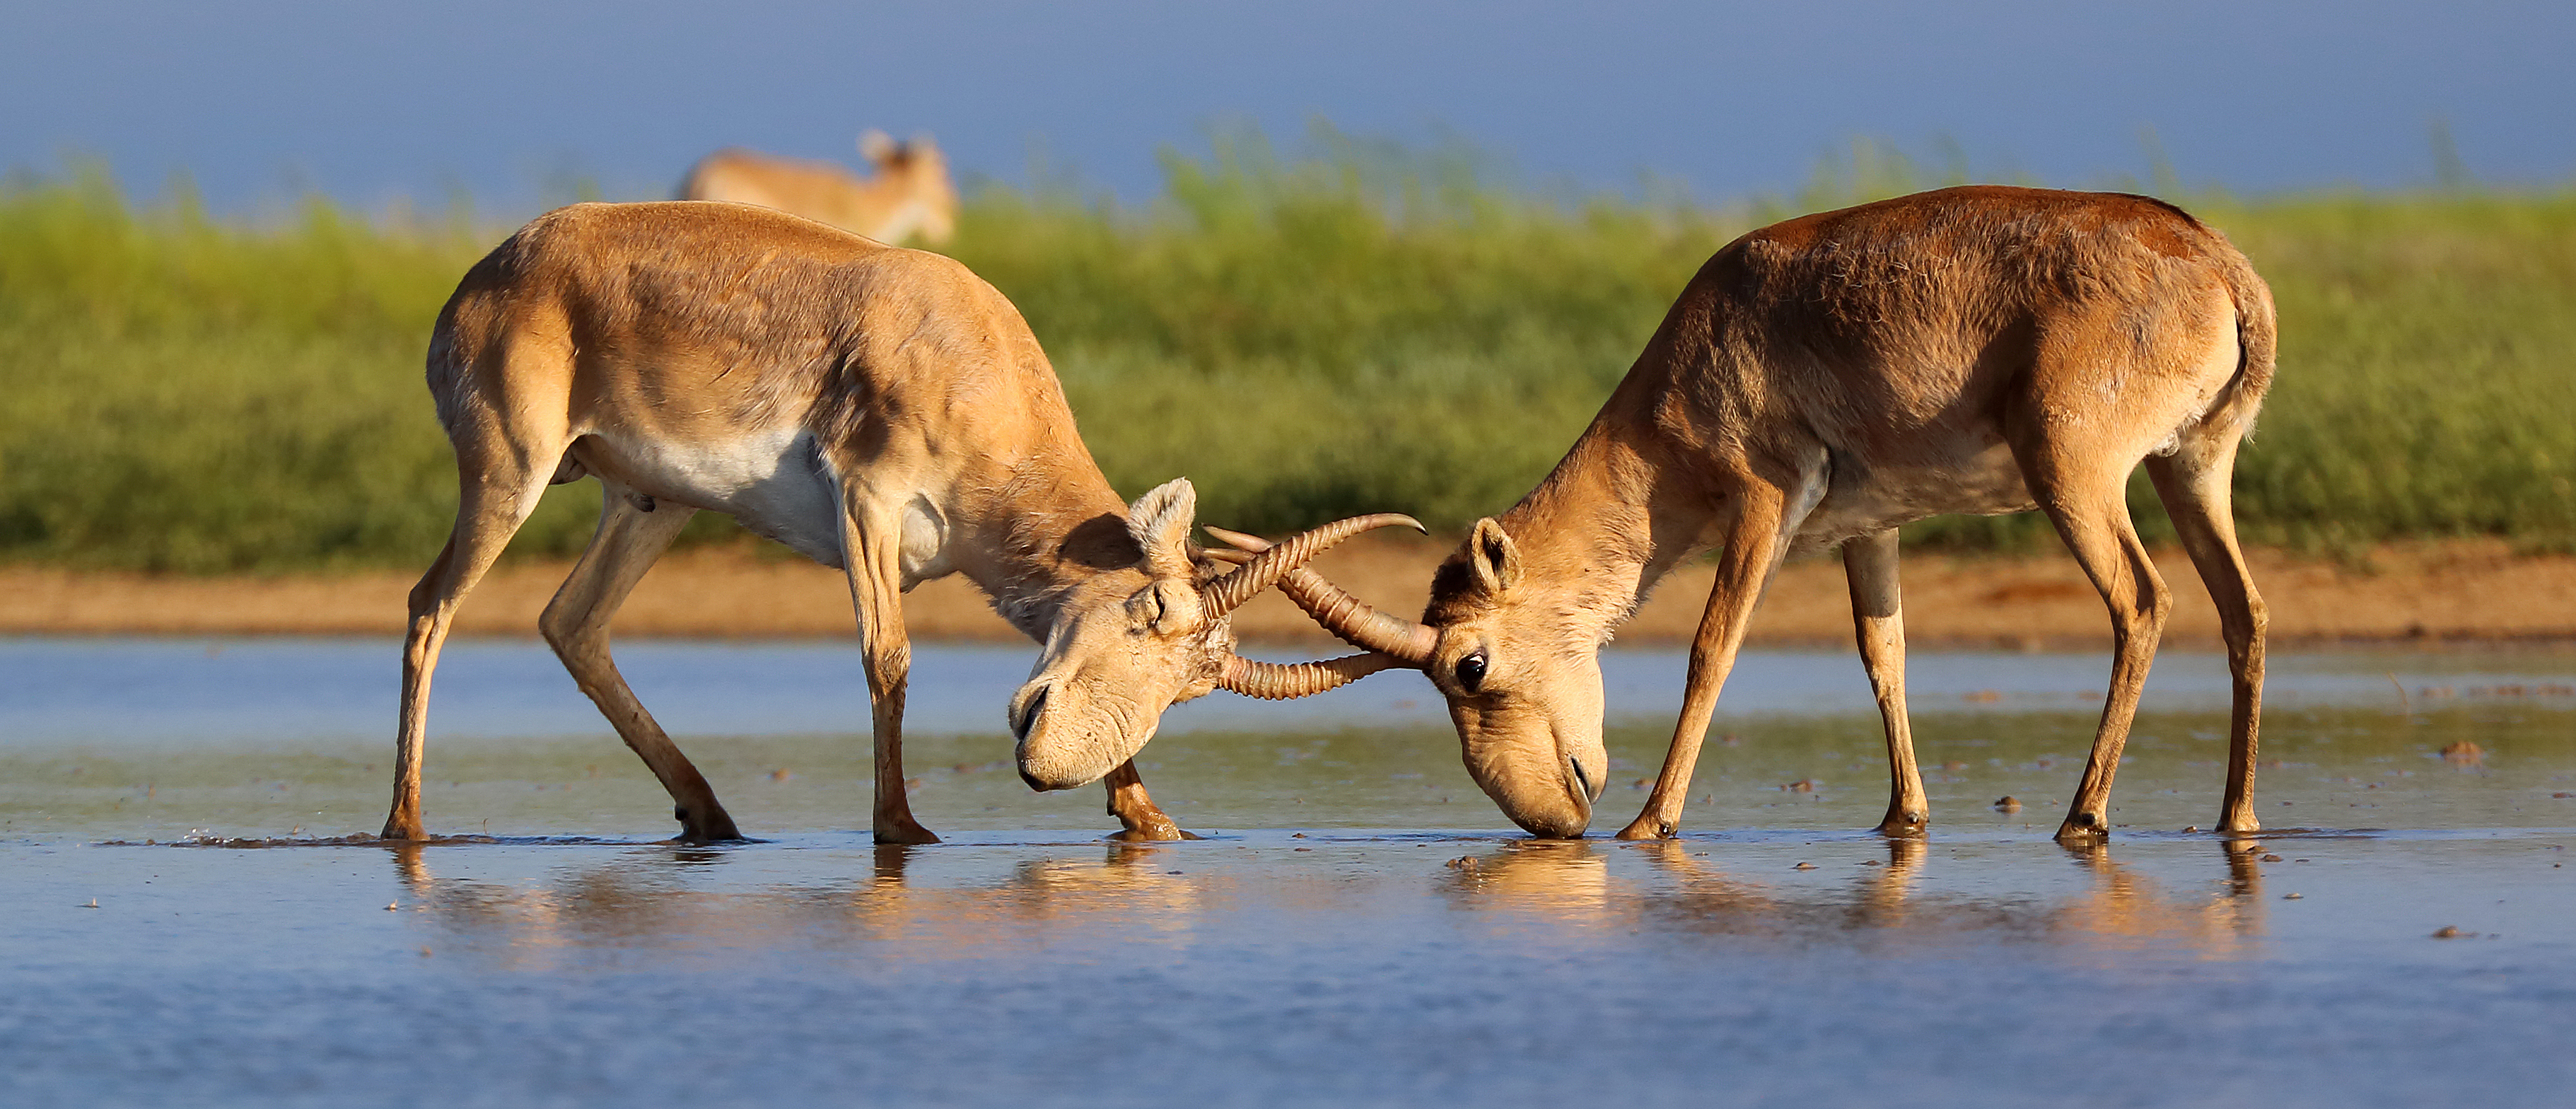 two saiga antelope sparring with their horns